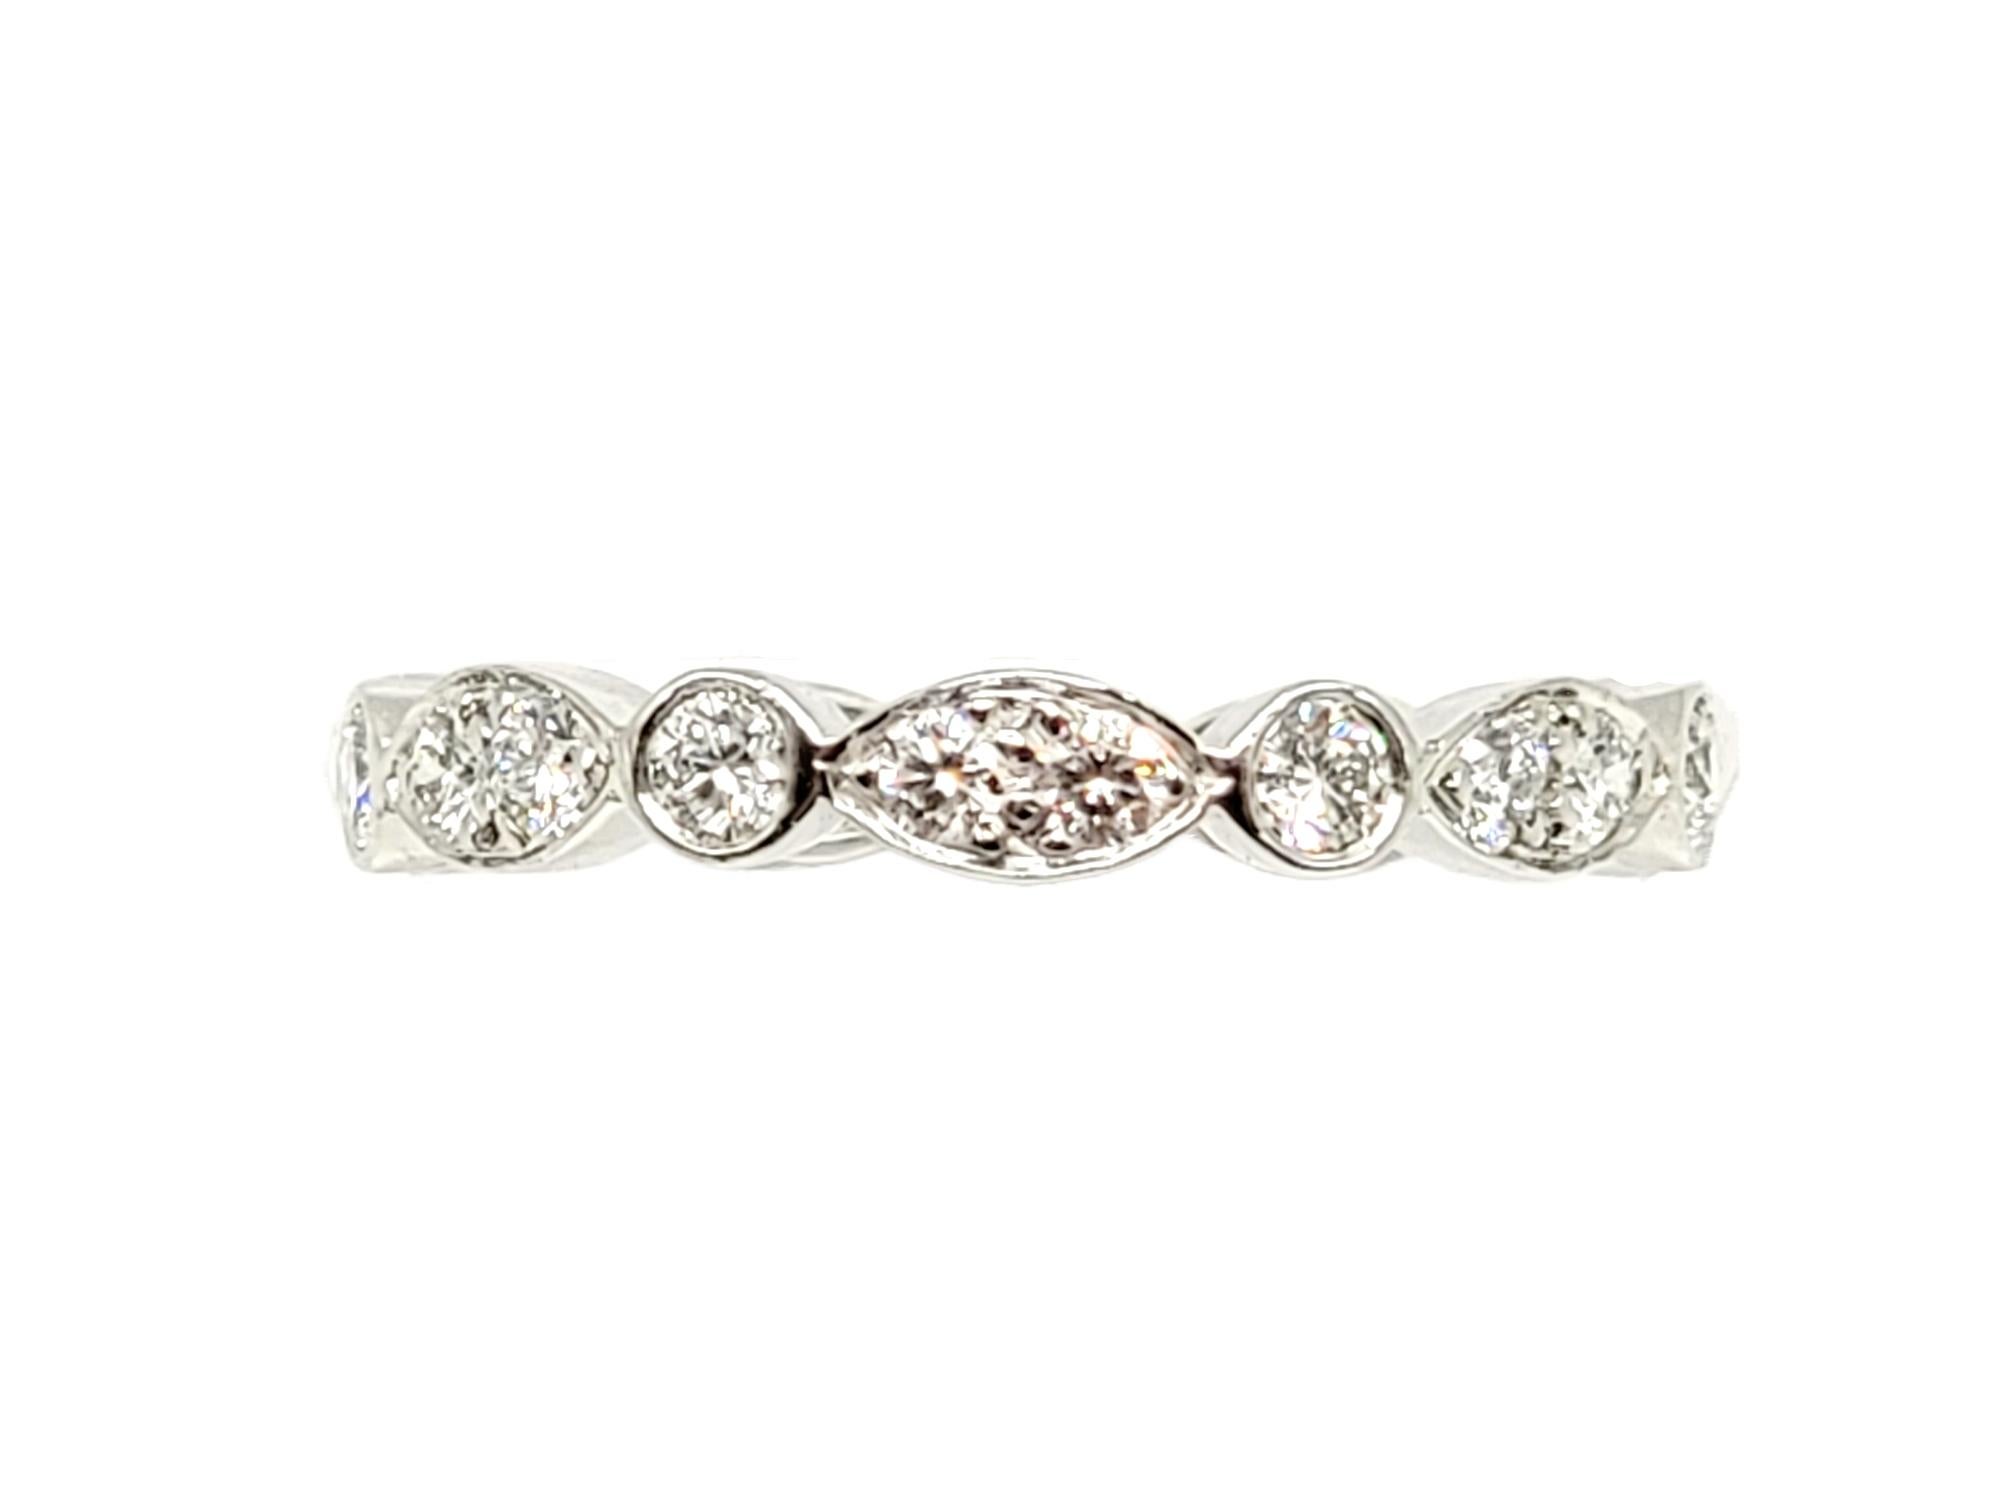 Ring size: 5.25

Exquisite Tiffany Jazz diamond and platinum band ring from renowned jeweler, Tiffany & Co.. This incredible ring has a vintage style charm with a modern, feminine twist.  It would be perfect paired with an engagement ring, or simply